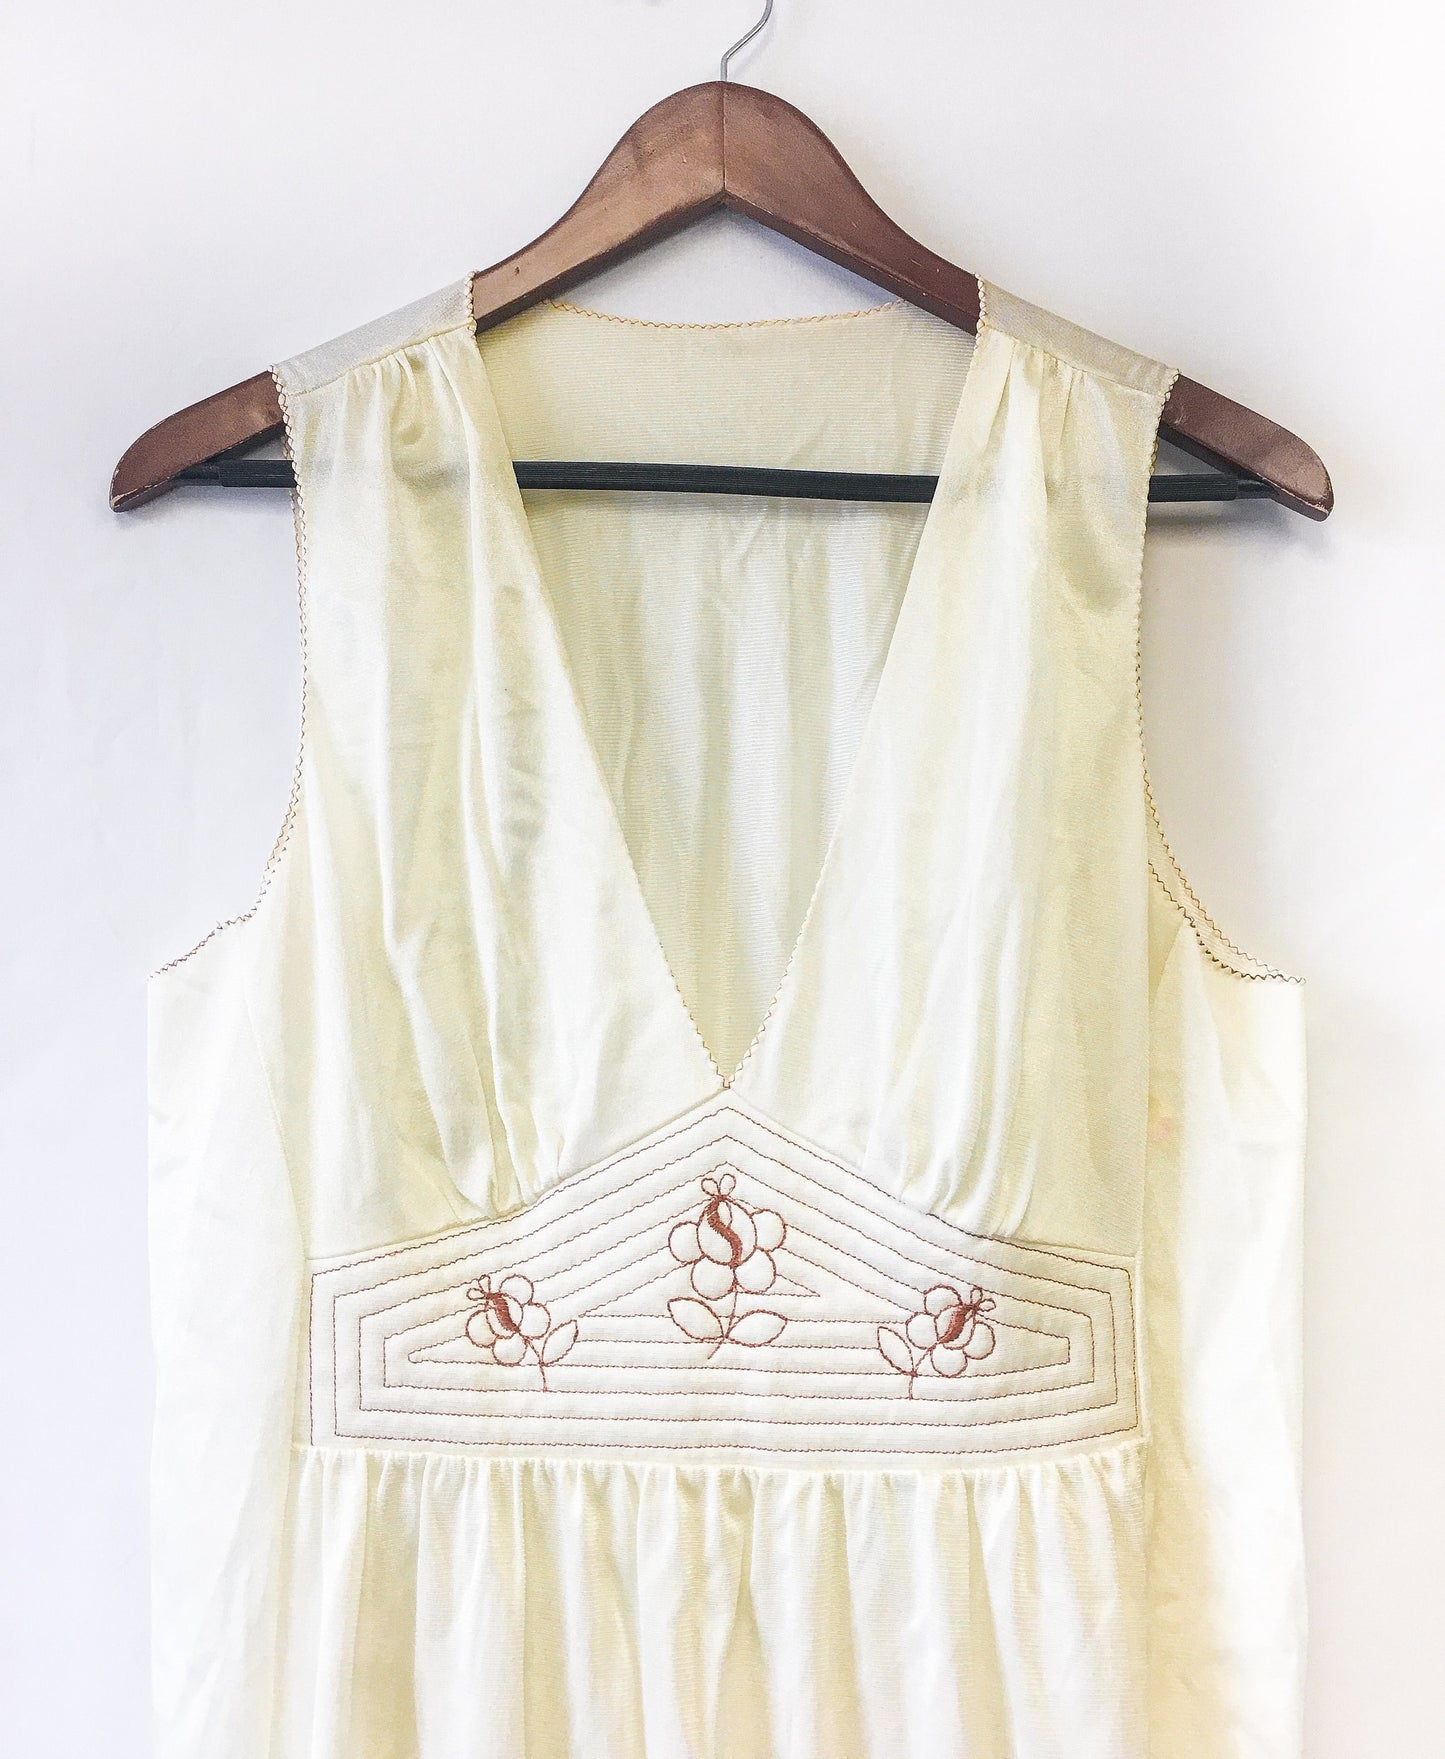 Vintage Sears Cream/Off-White Peignoir Slip Dress with Brown Floral Embroidery, Sz. L 38-40